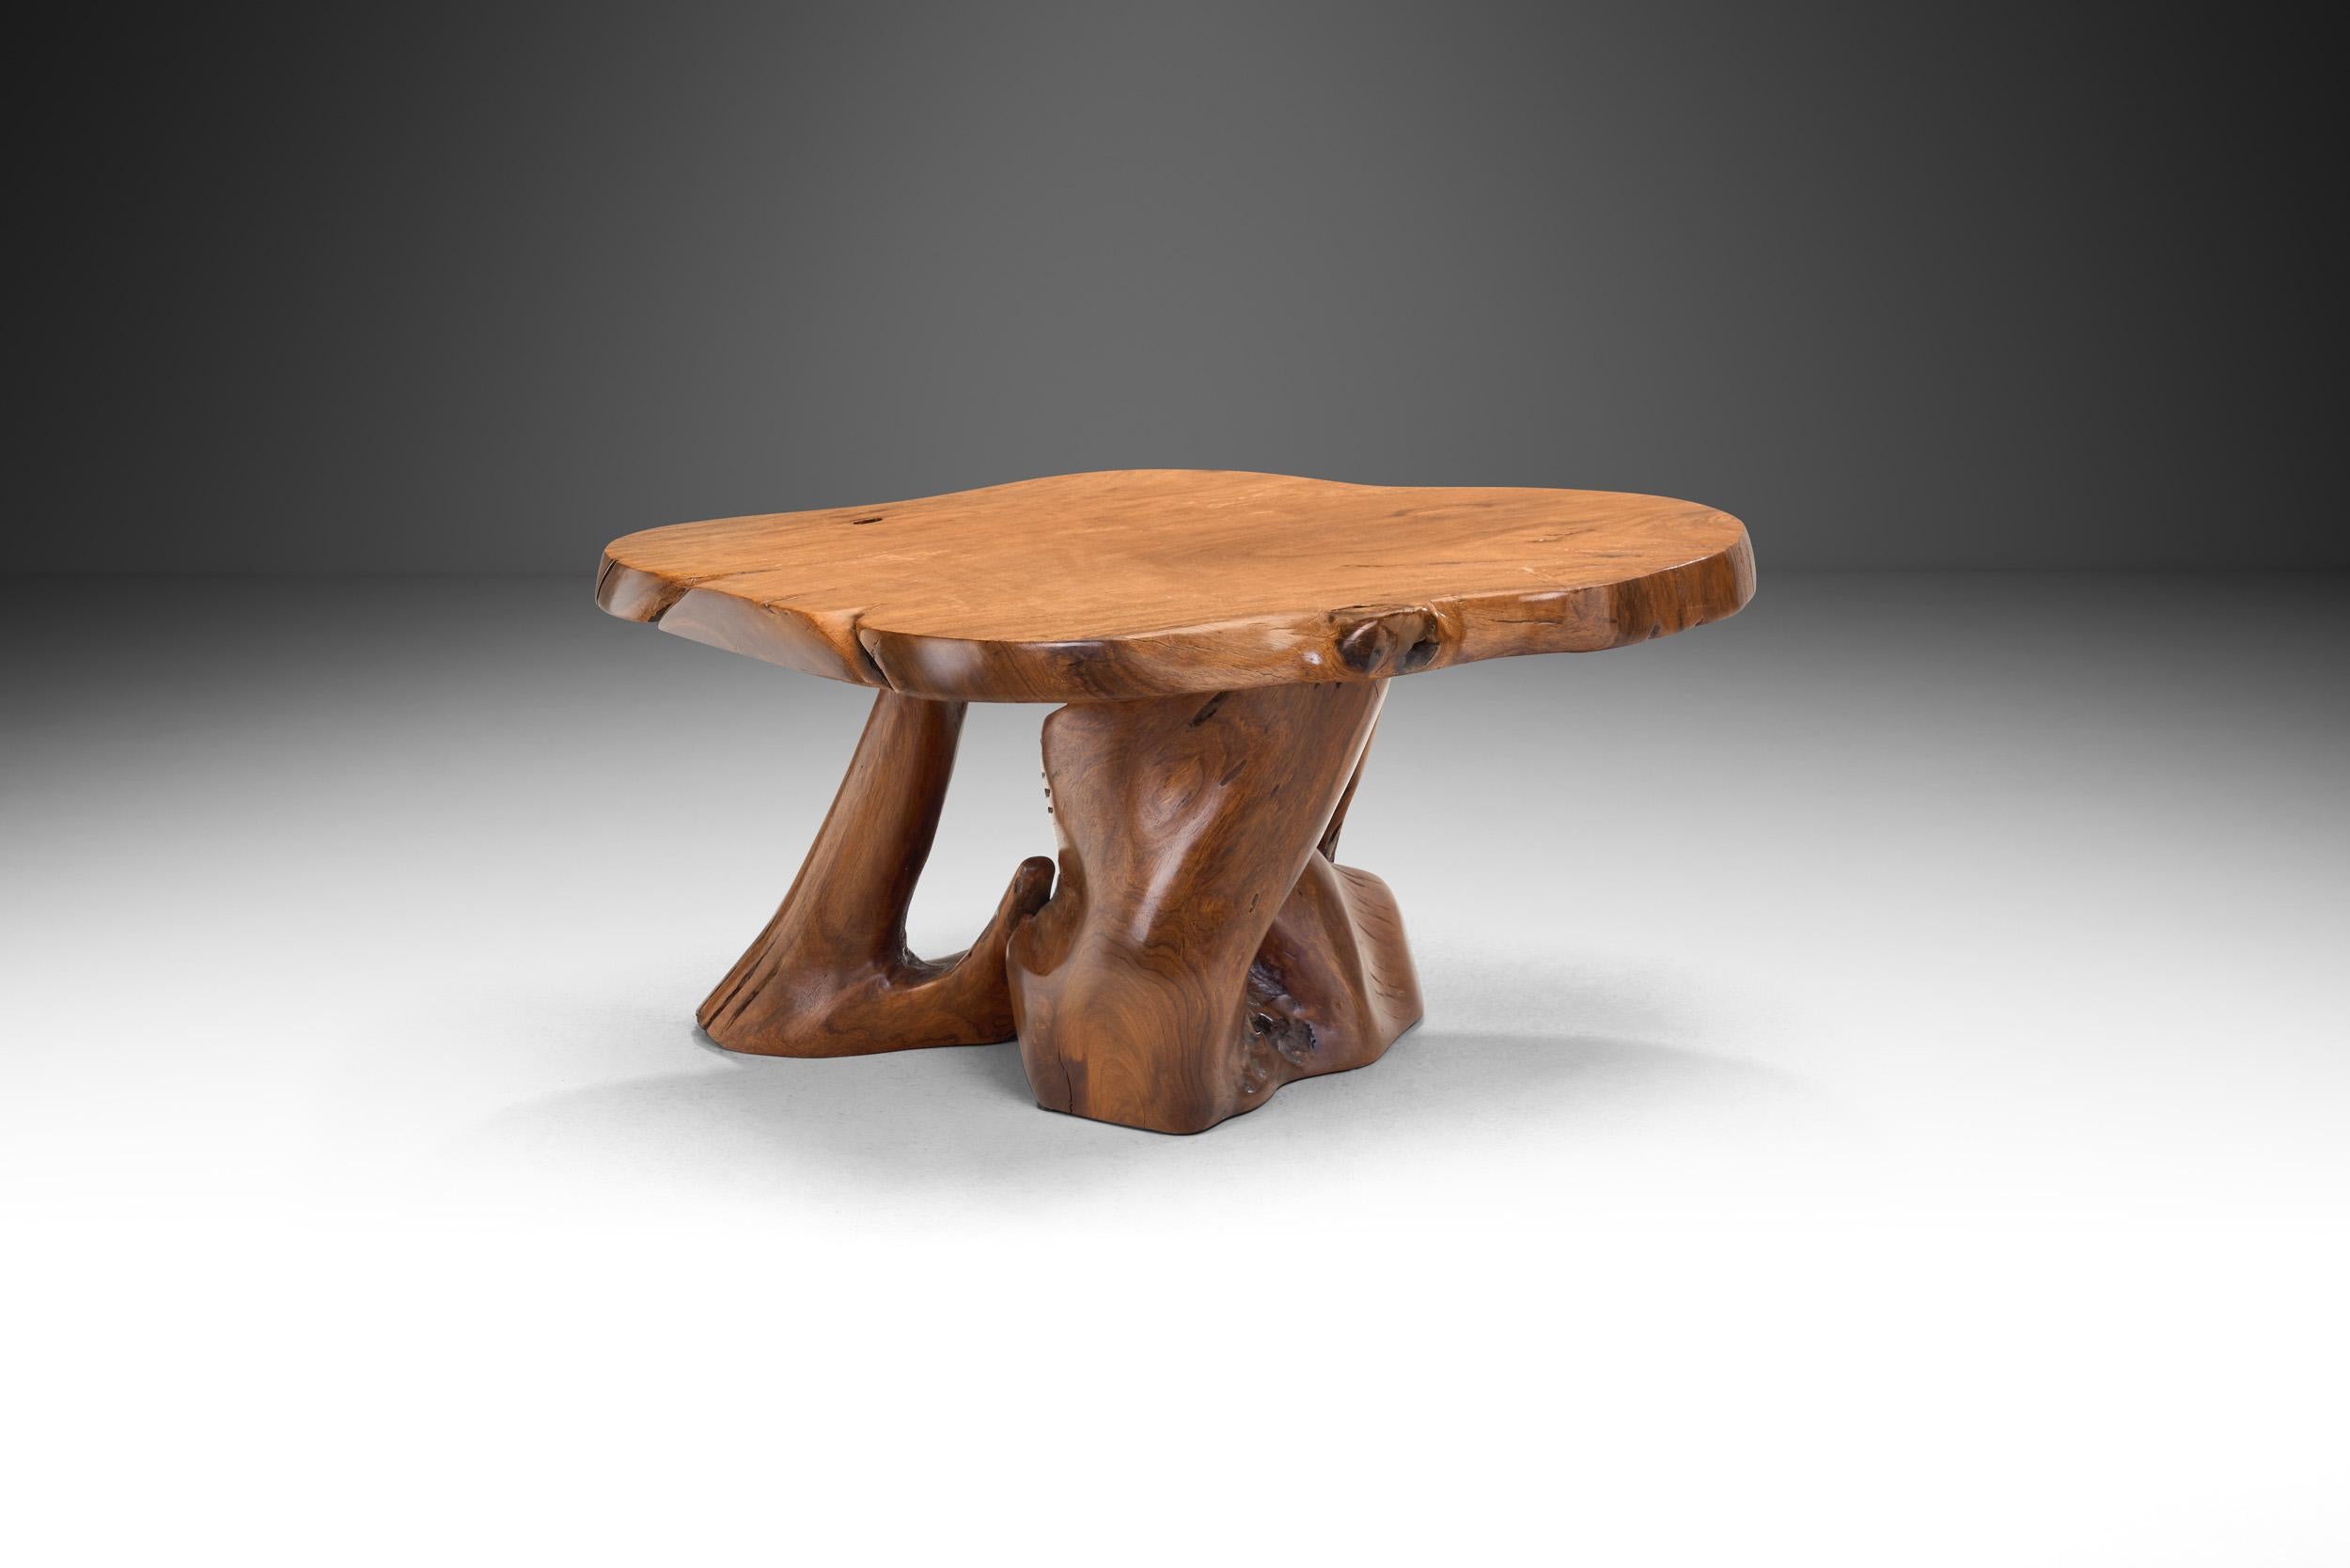 Inspired by the beauty of the natural root form, this organic teak coffee table is handcrafted from one piece of teak root. The root is painstakingly unearthed. The surface is sanded and polished while preserving the material’s gorgeous, original